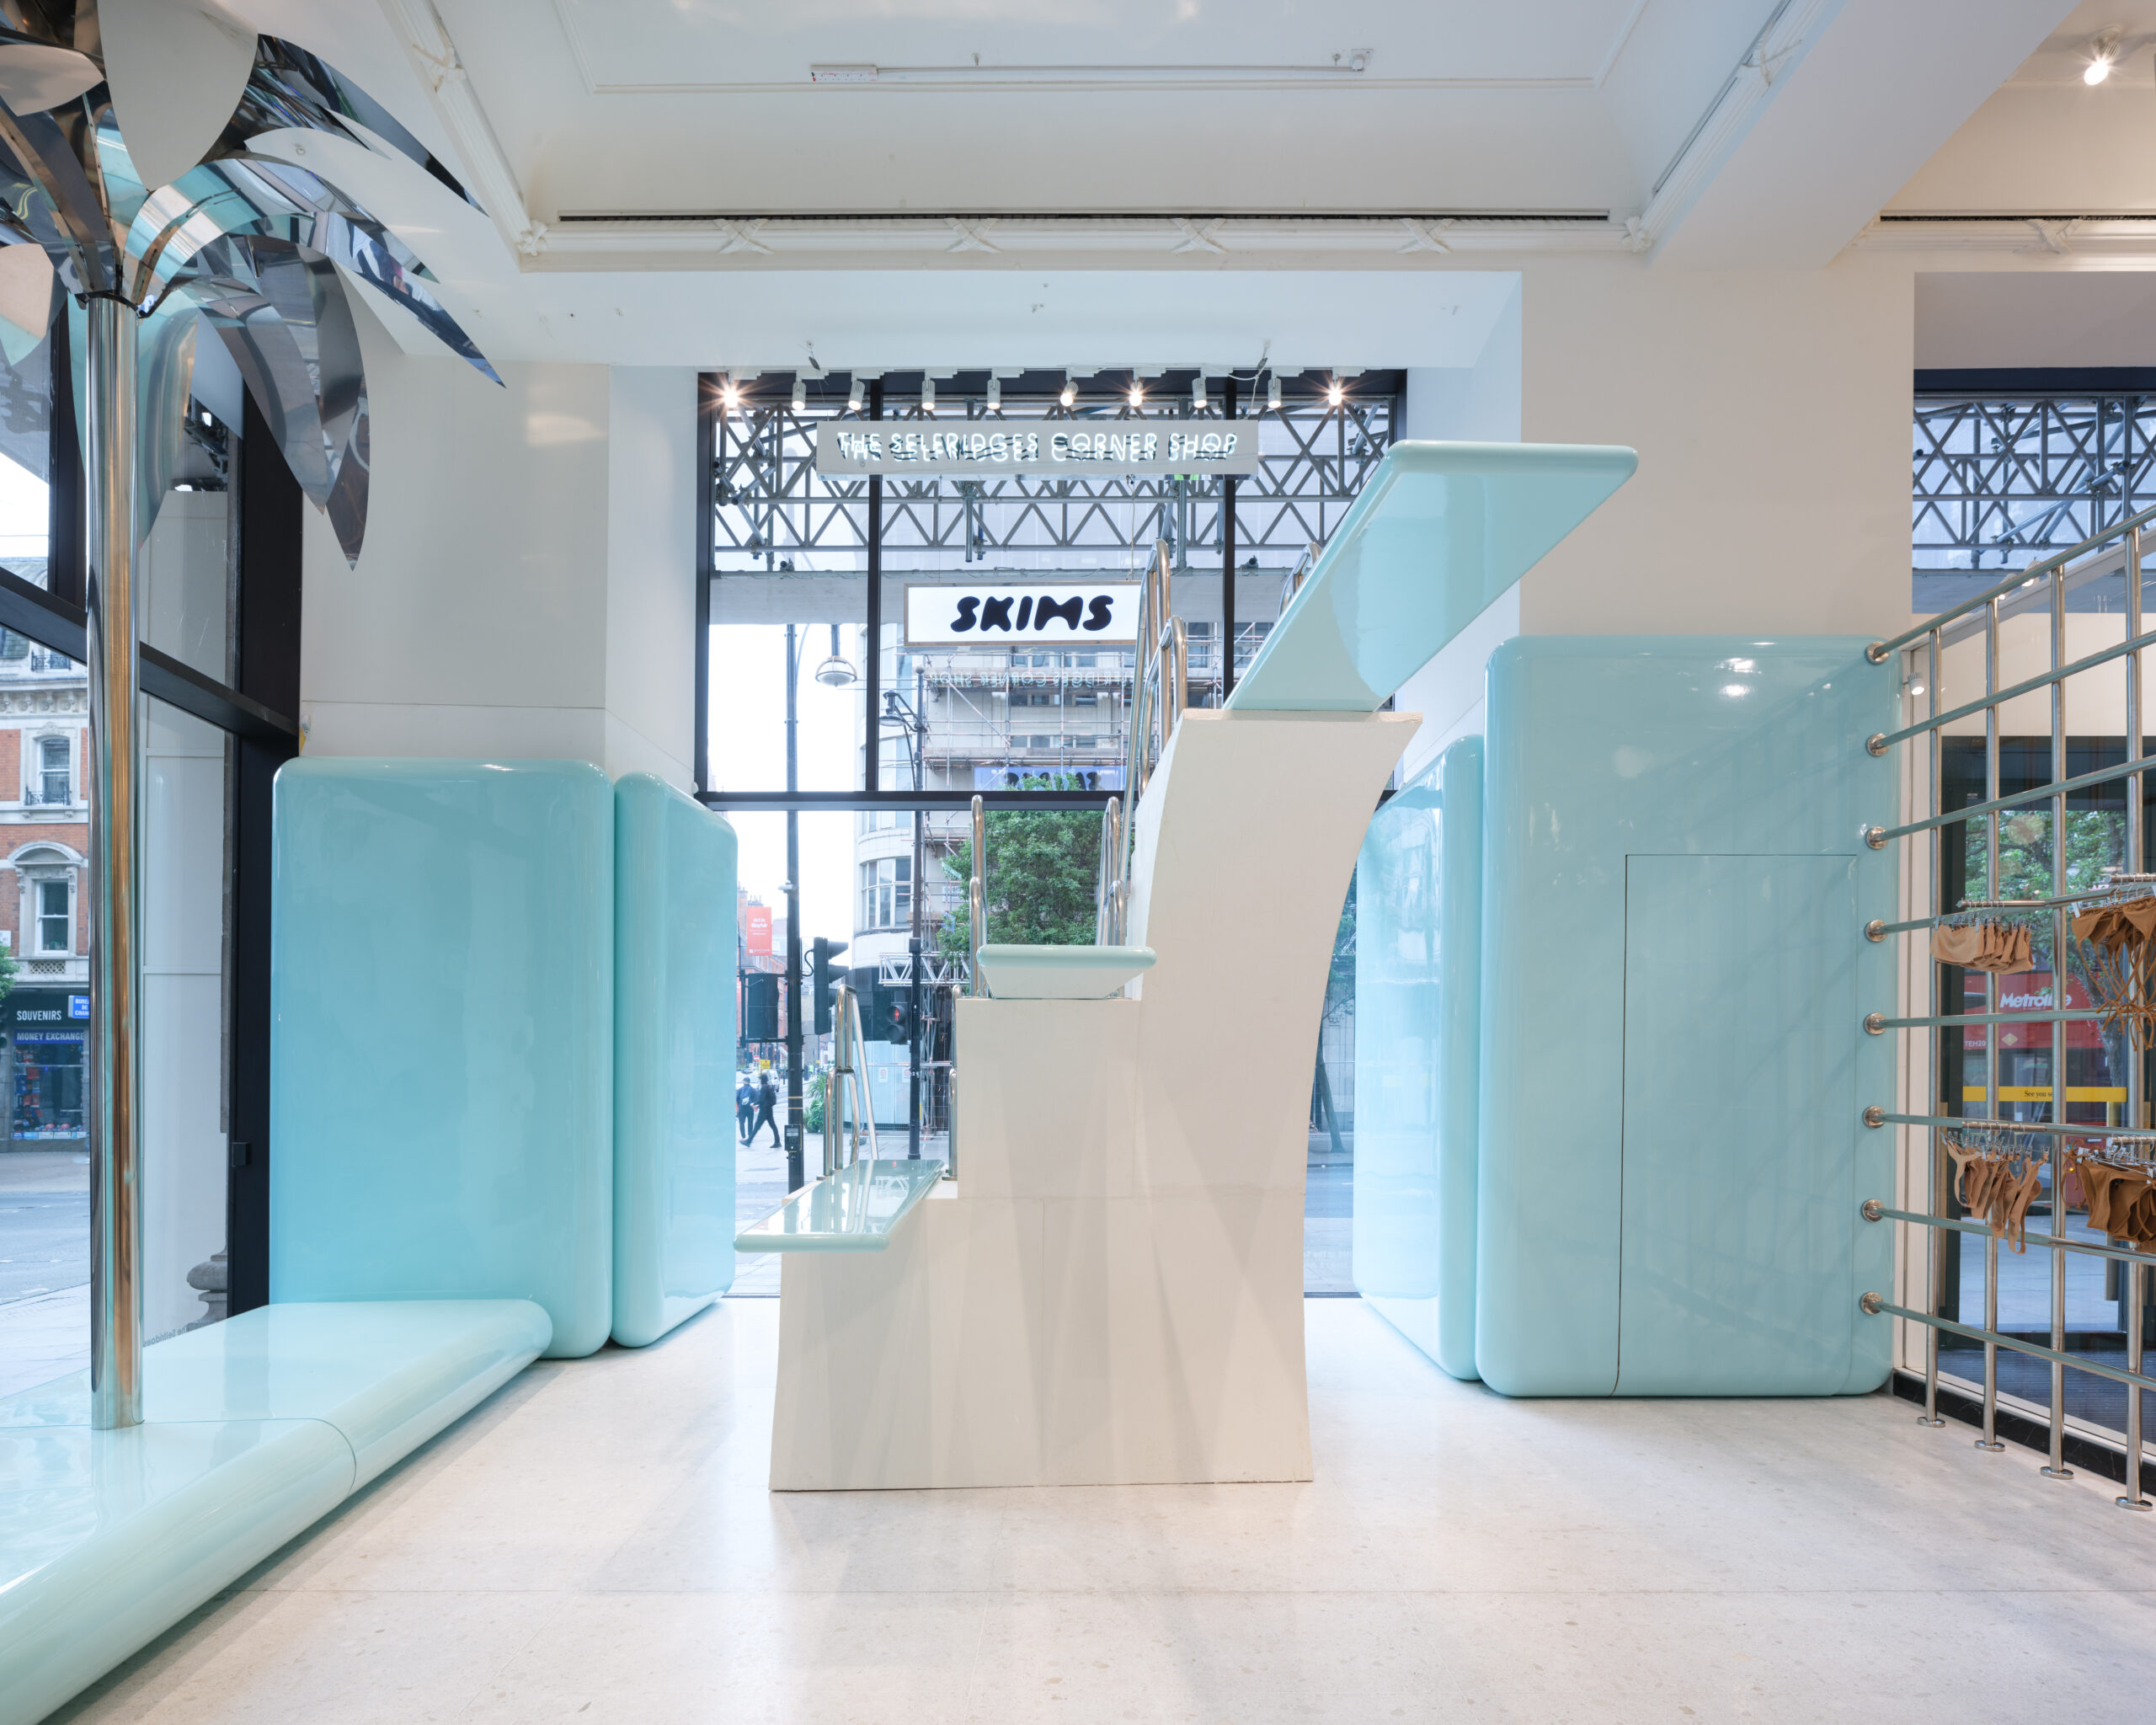 The Skims pop-up space in Selfridges London. Credit: Supplied